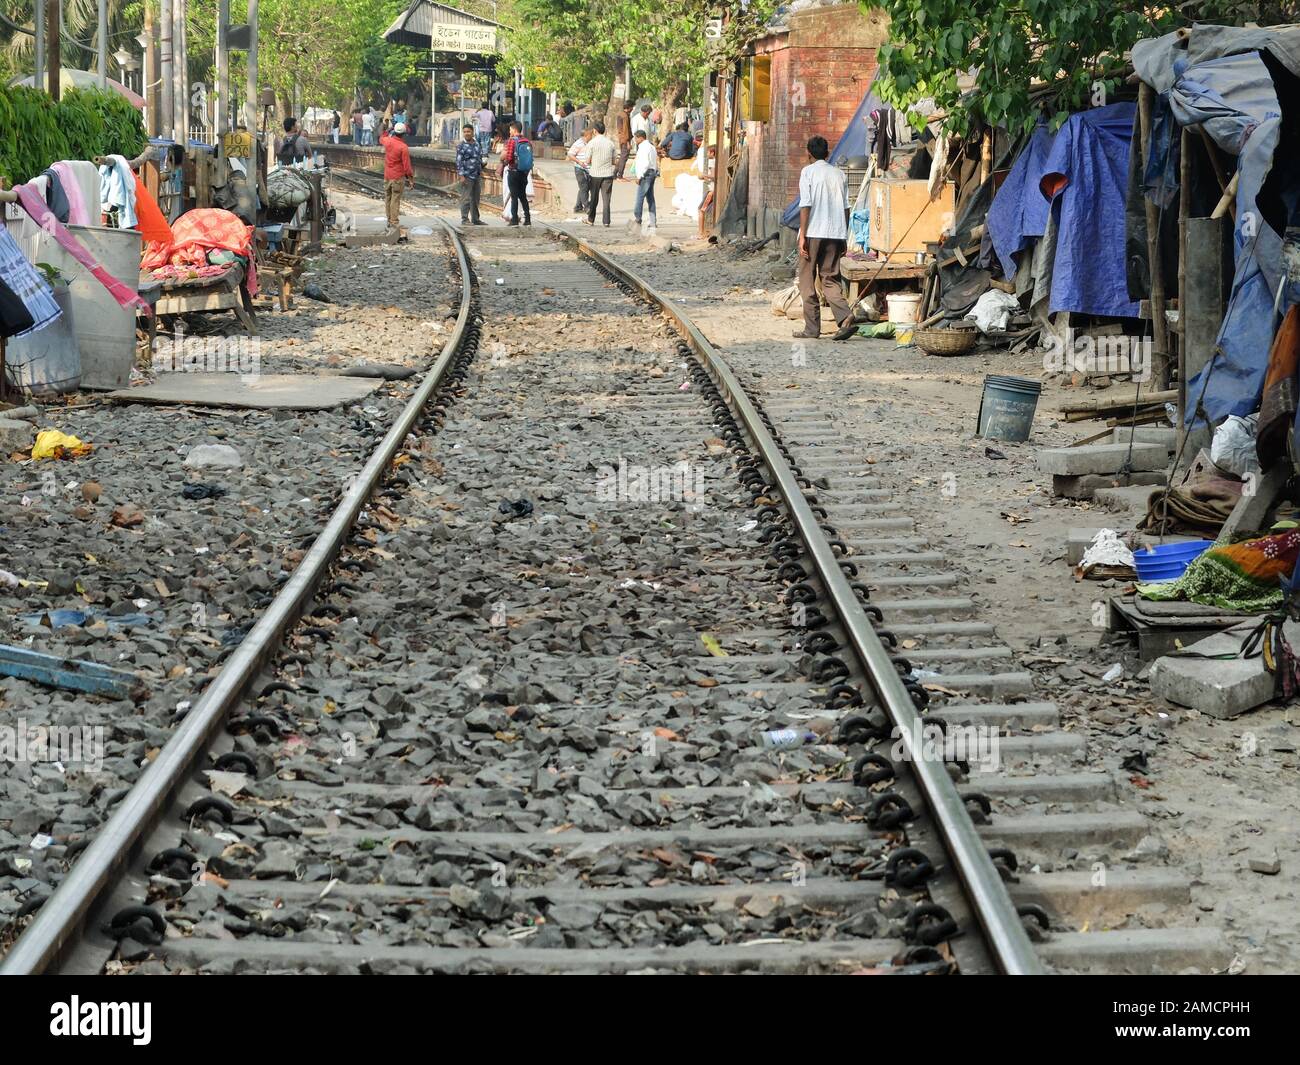 KOLKATA,WEST BENGAL/INDIA-MARCH 20 2018:Makeshift shanty dwellings provide shelter for the poor who live along the edges of the railway tracks in the Stock Photo